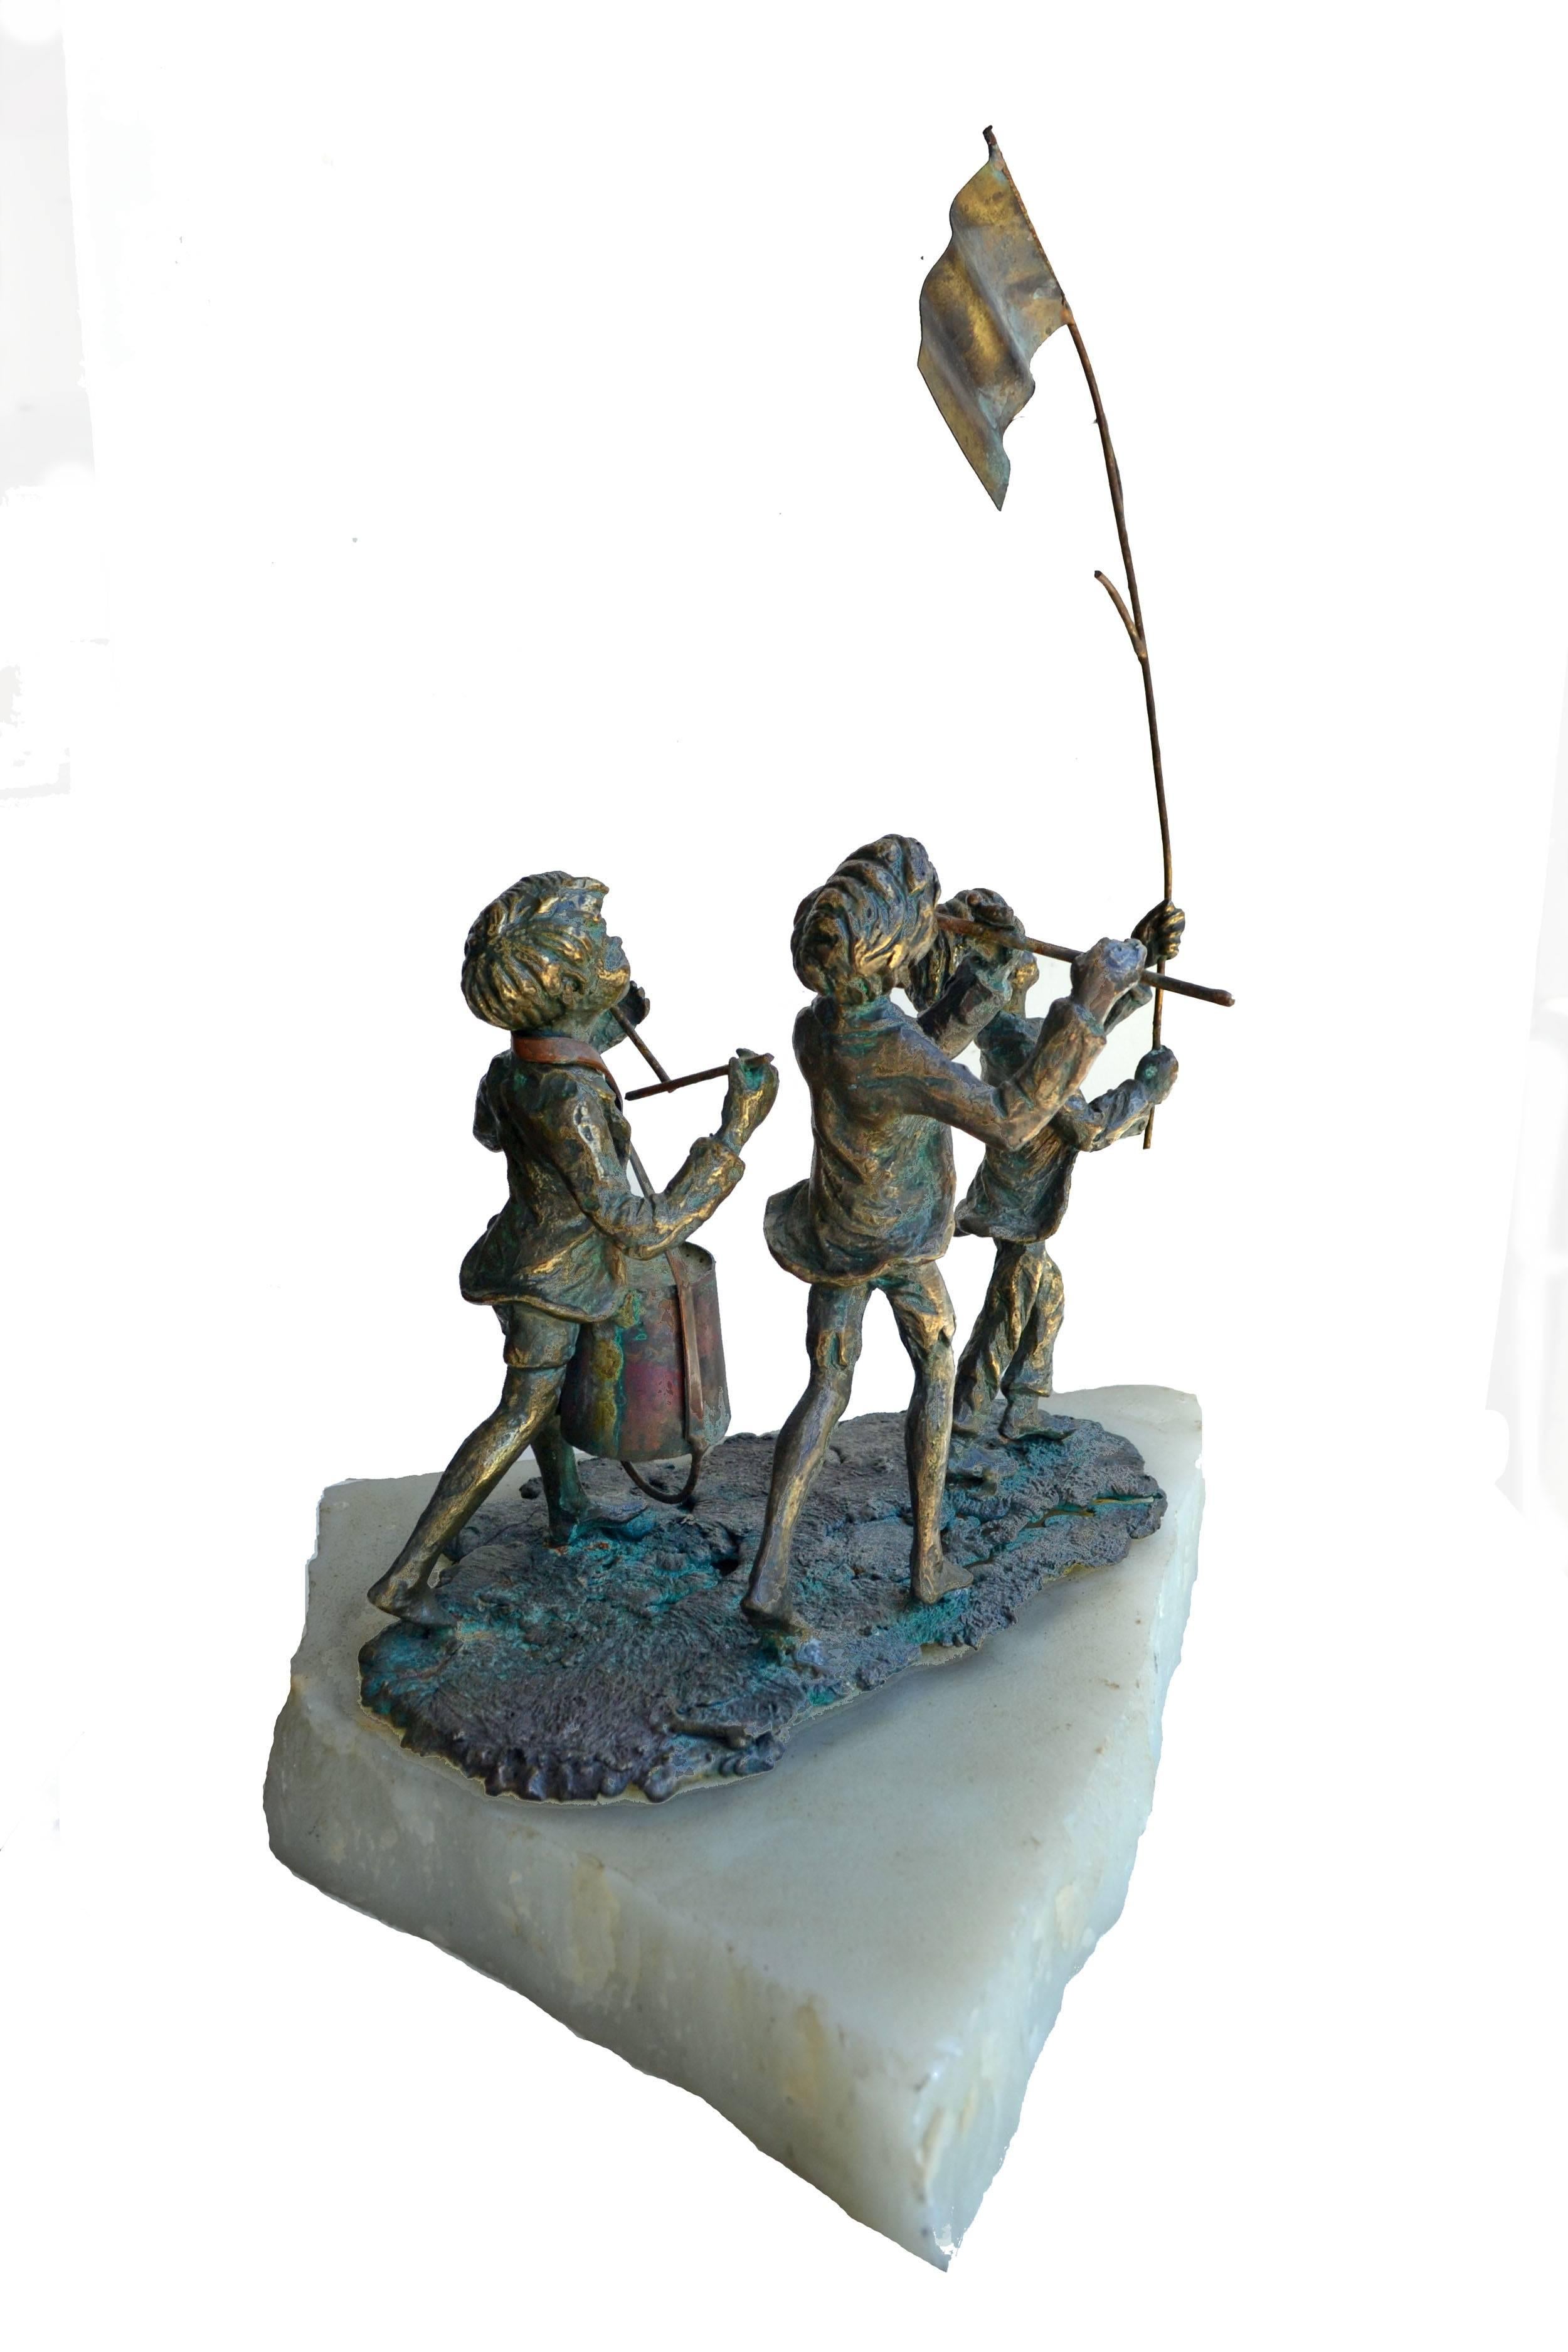 Expressive Bronze sculpture of a group of boys on the 4th of July celebrating in their own way that 